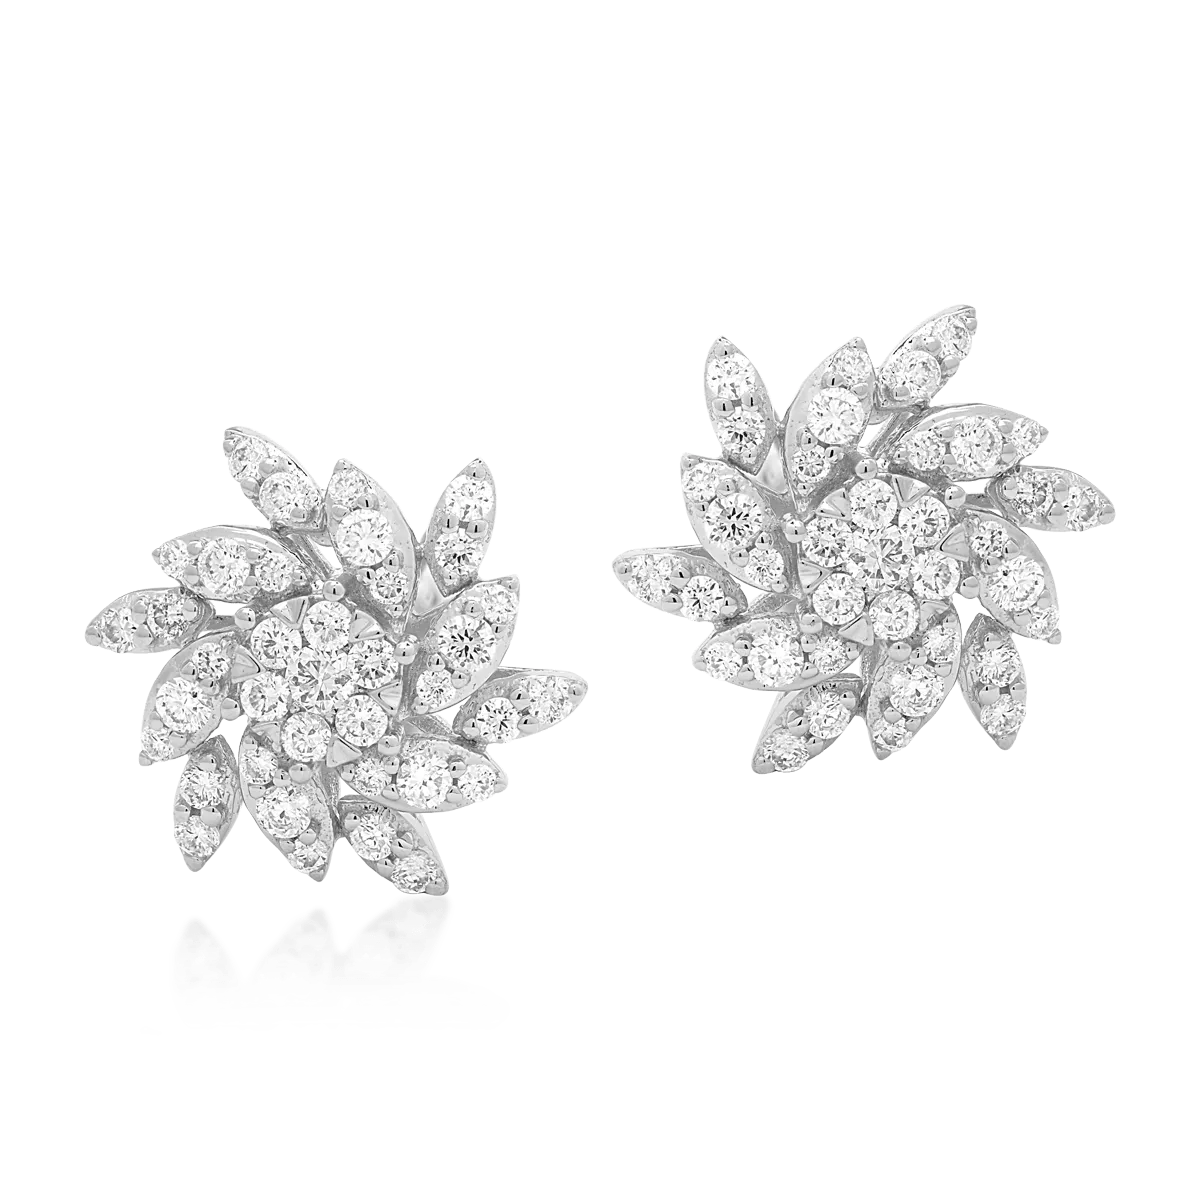 14K white gold earrings with 0.5ct diamonds